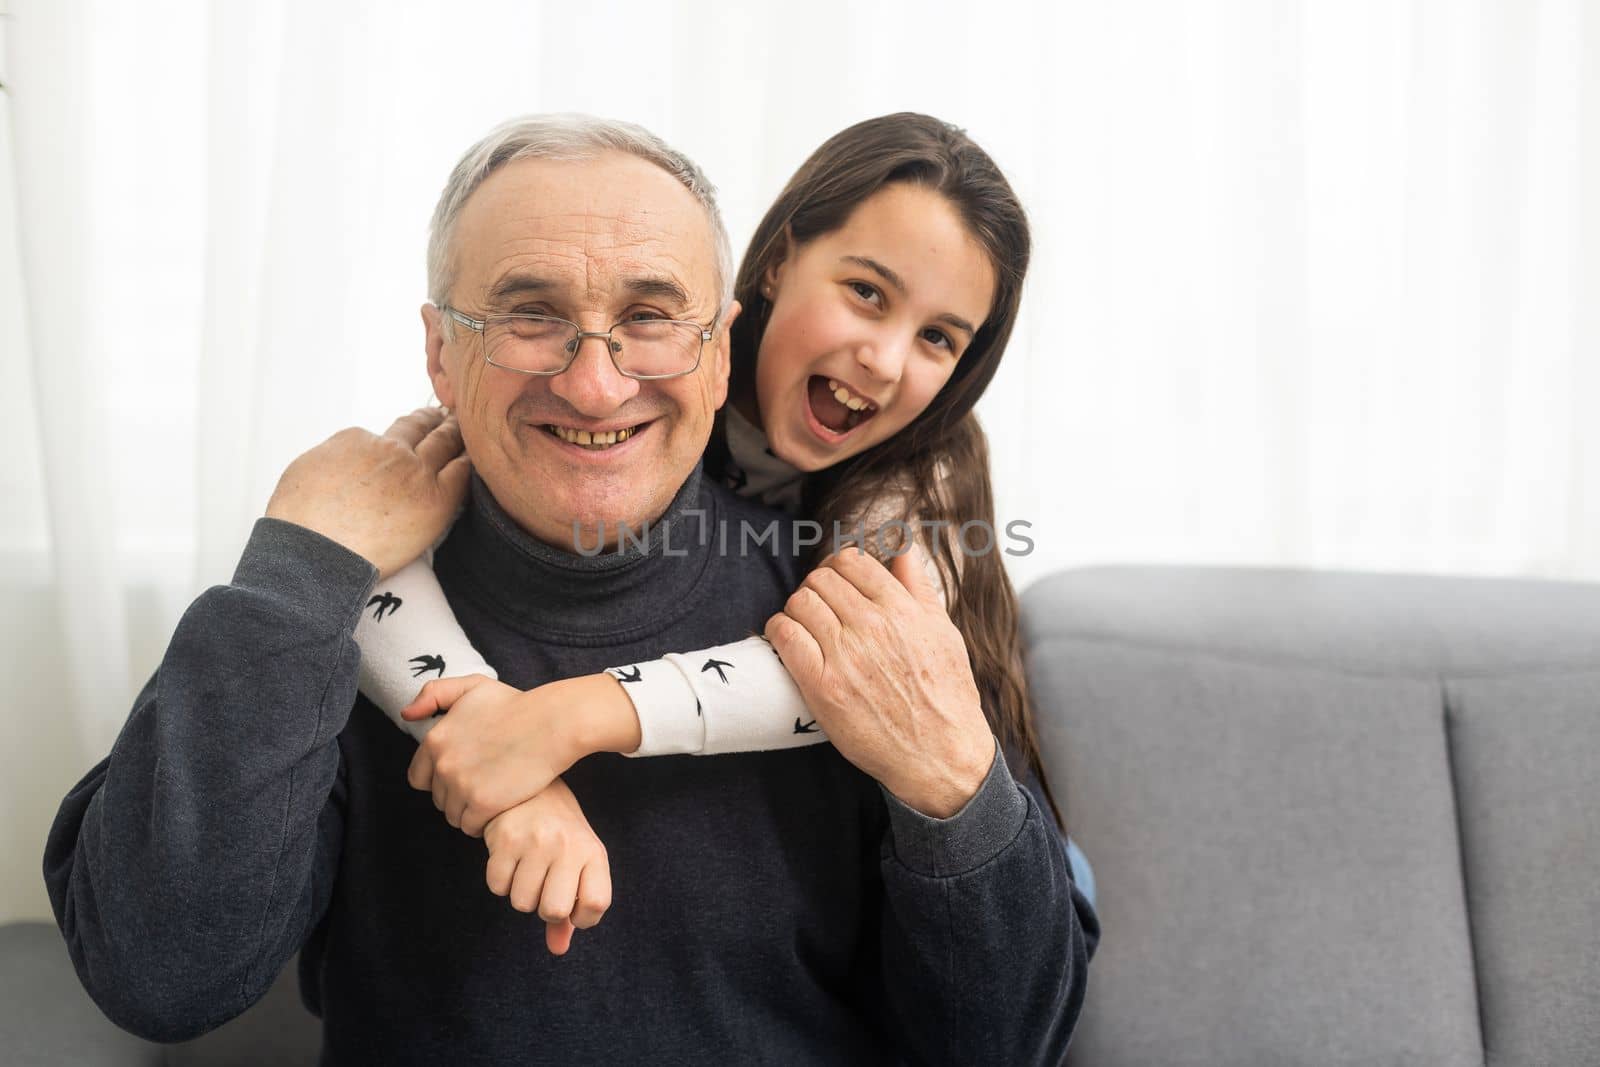 Elderly eighty plus year old man with granddaughter in a home setting